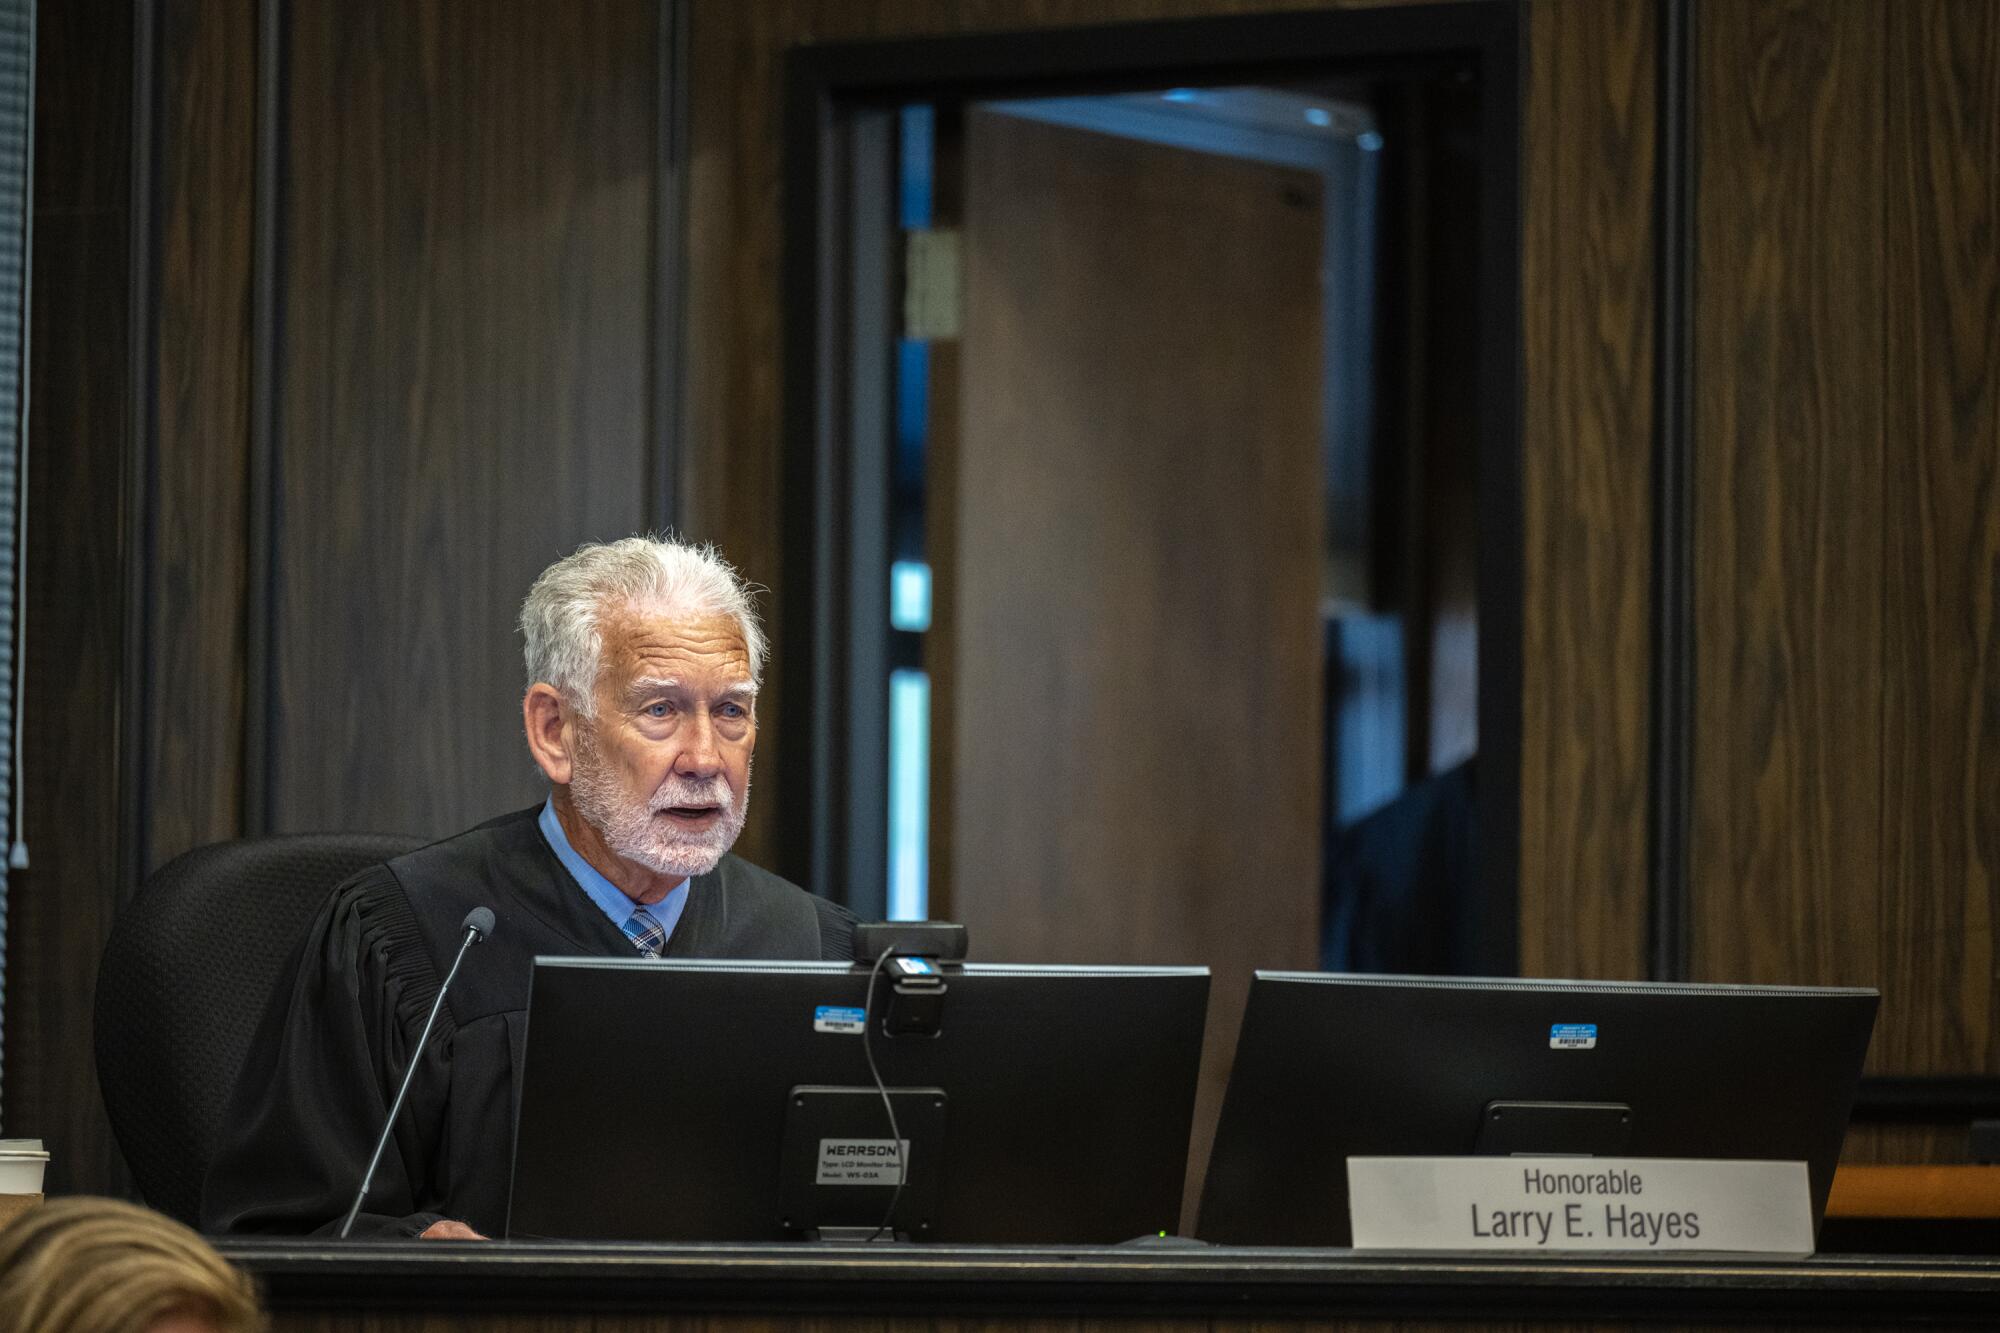 Judge Larry E. Hayes sat on the bench with two computer monitors and a microphone